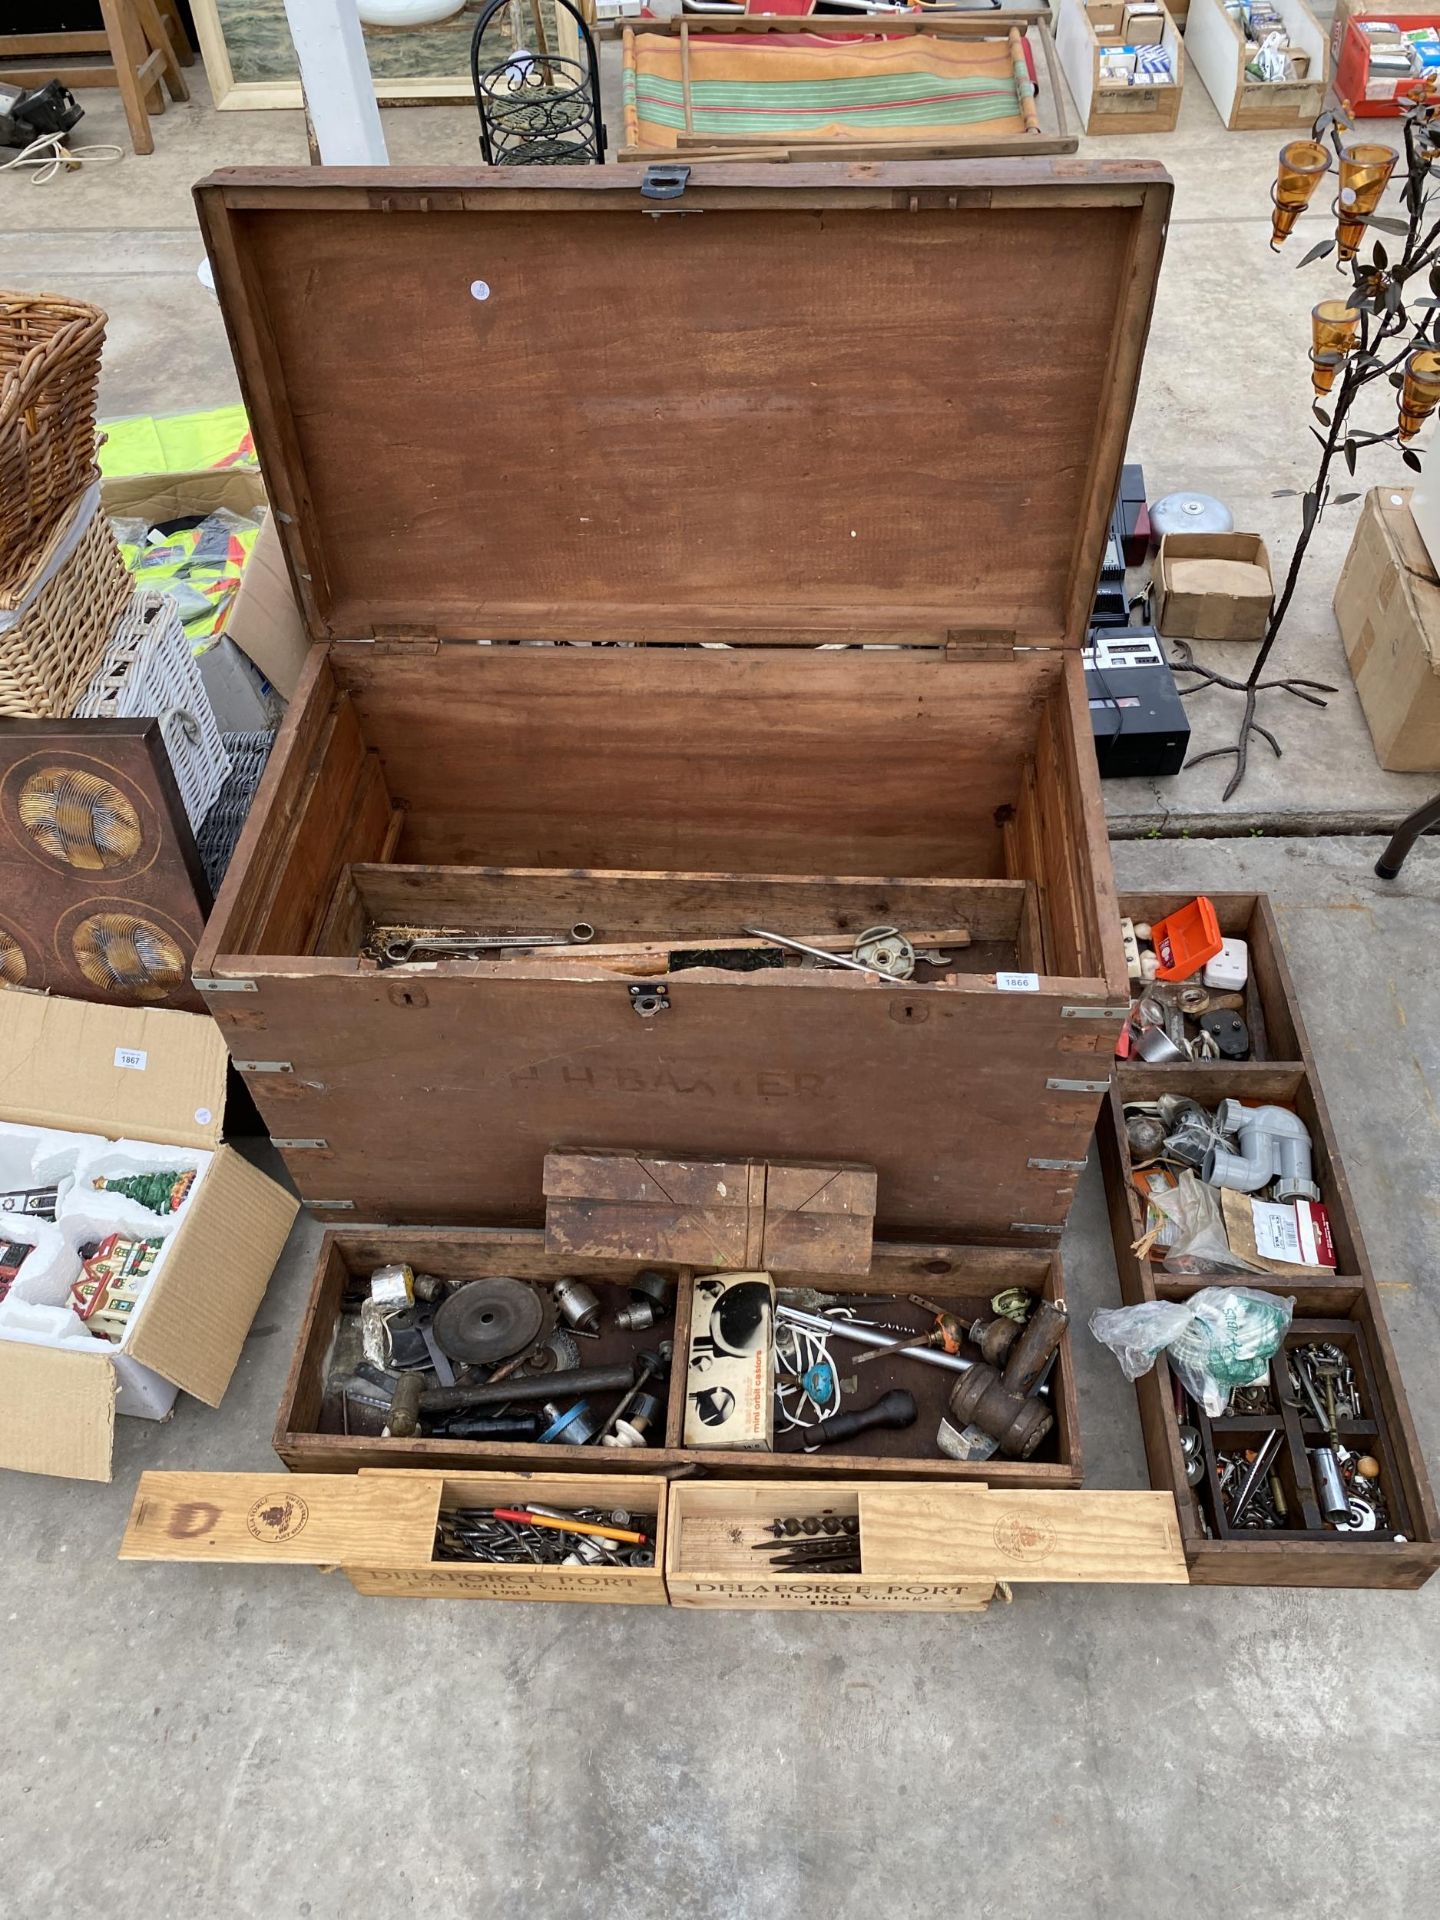 A LARGE VINTAGE ENGINEERS CHEST CONTAINING A LARGE ASSORTMENT OF TOOLS